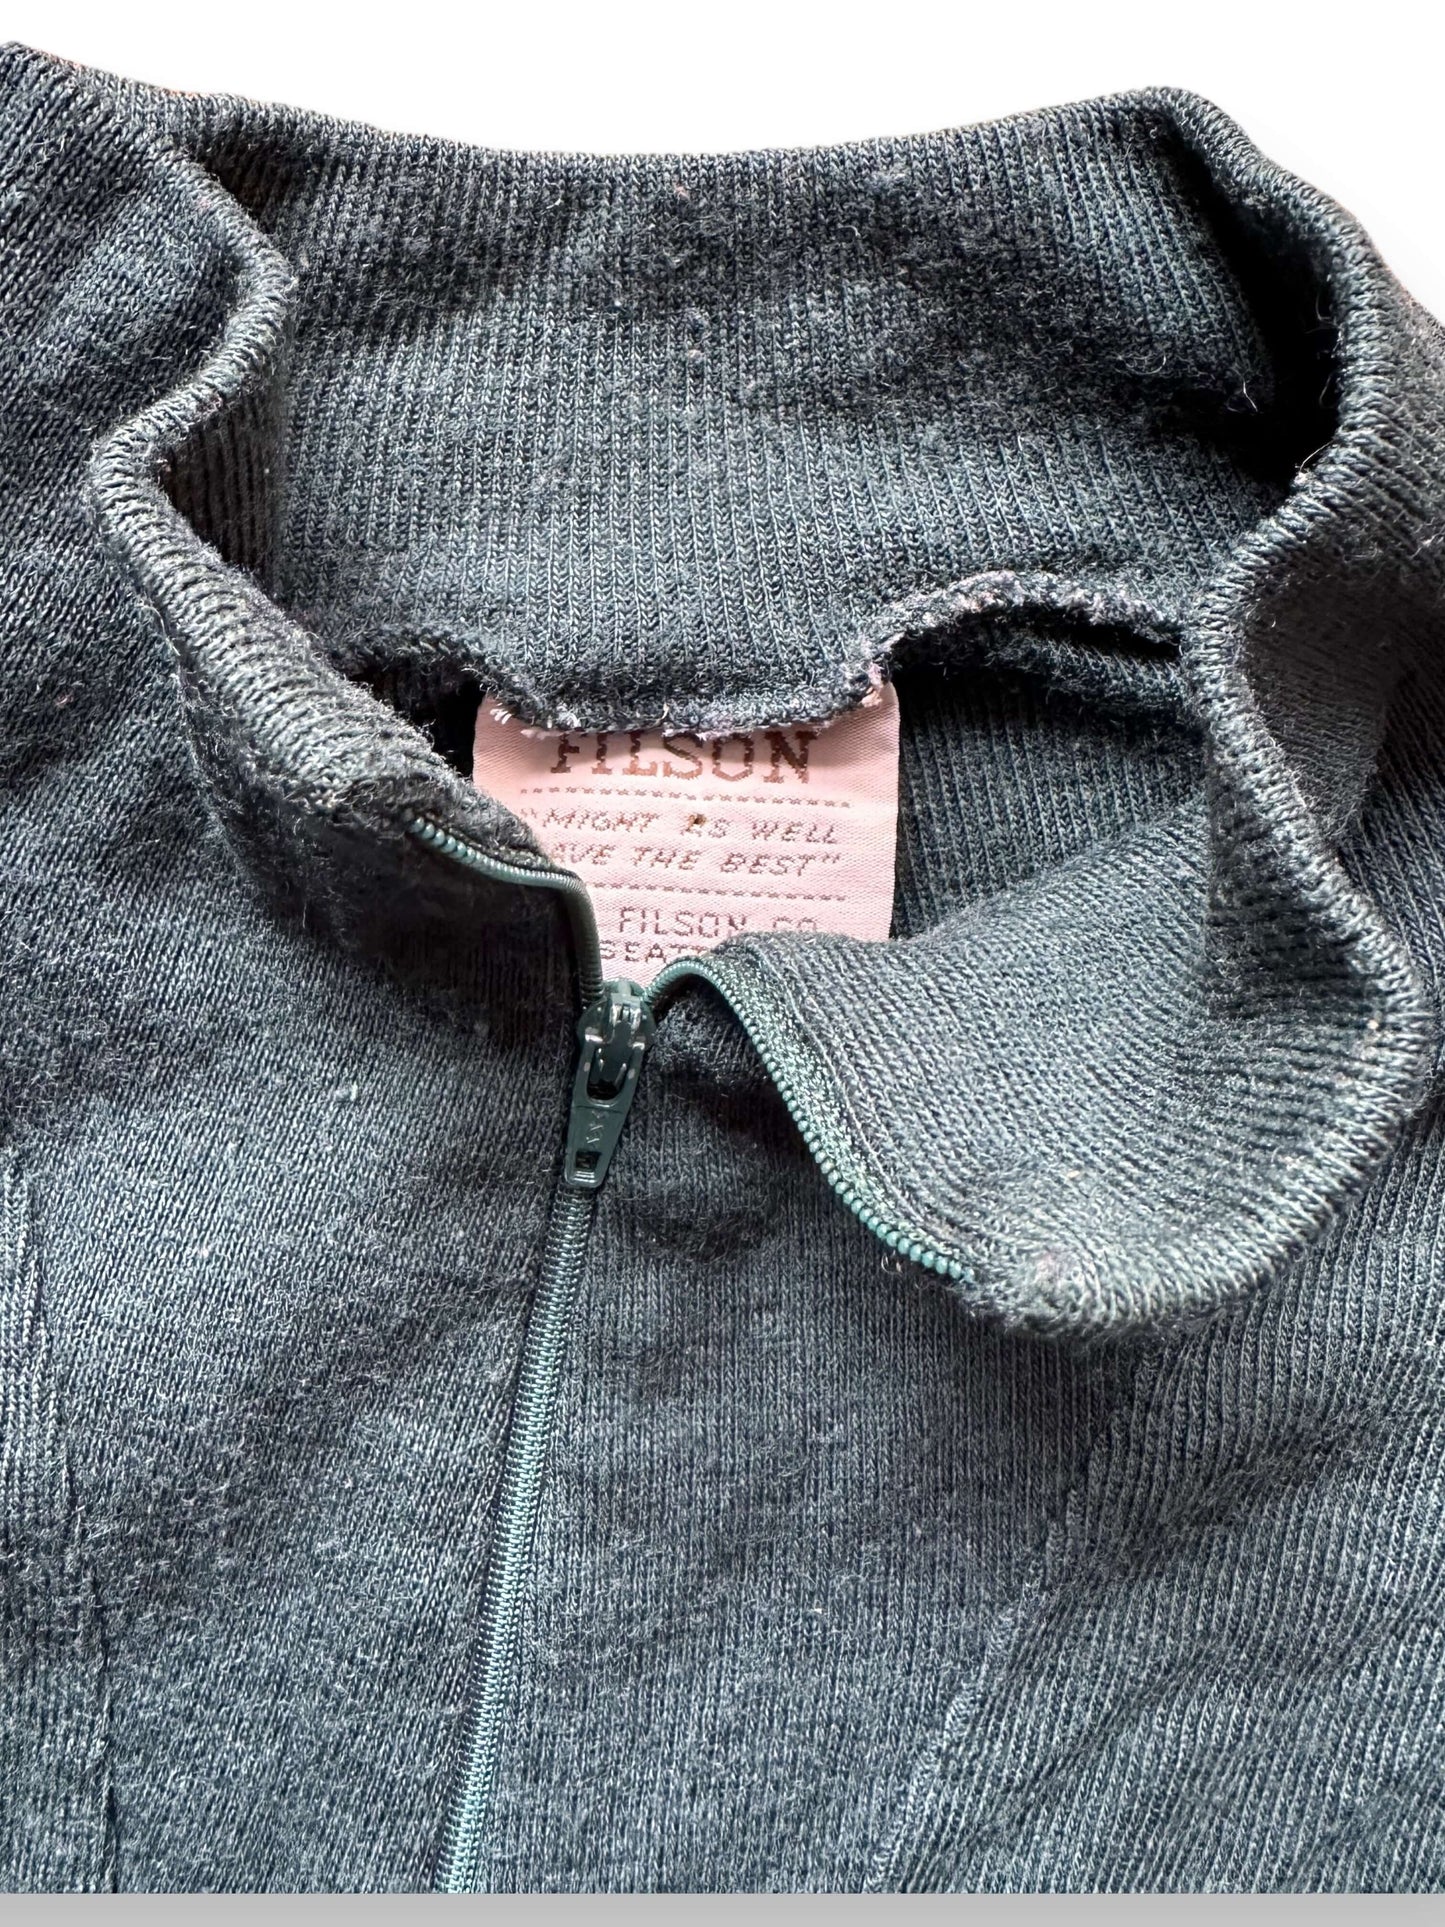 Tag View of Filson Wool Base Layer Top SZ S |  Barn Owl Vintage Goods | Vintage Filson Workwear Seattle